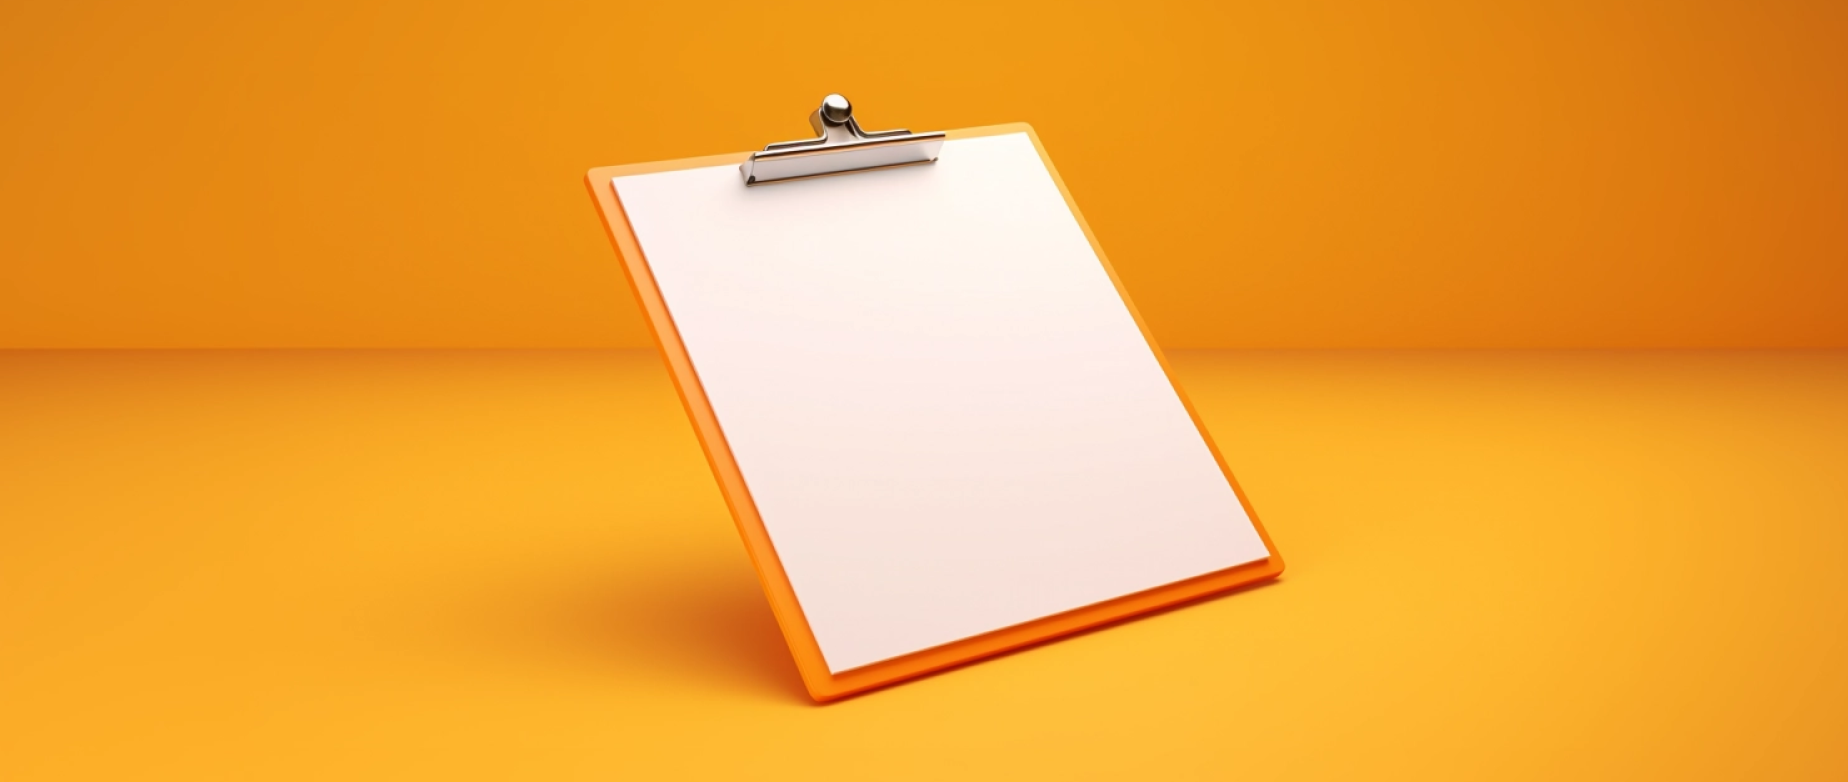 A clipboard with a white blank piece of paper on an orange background.